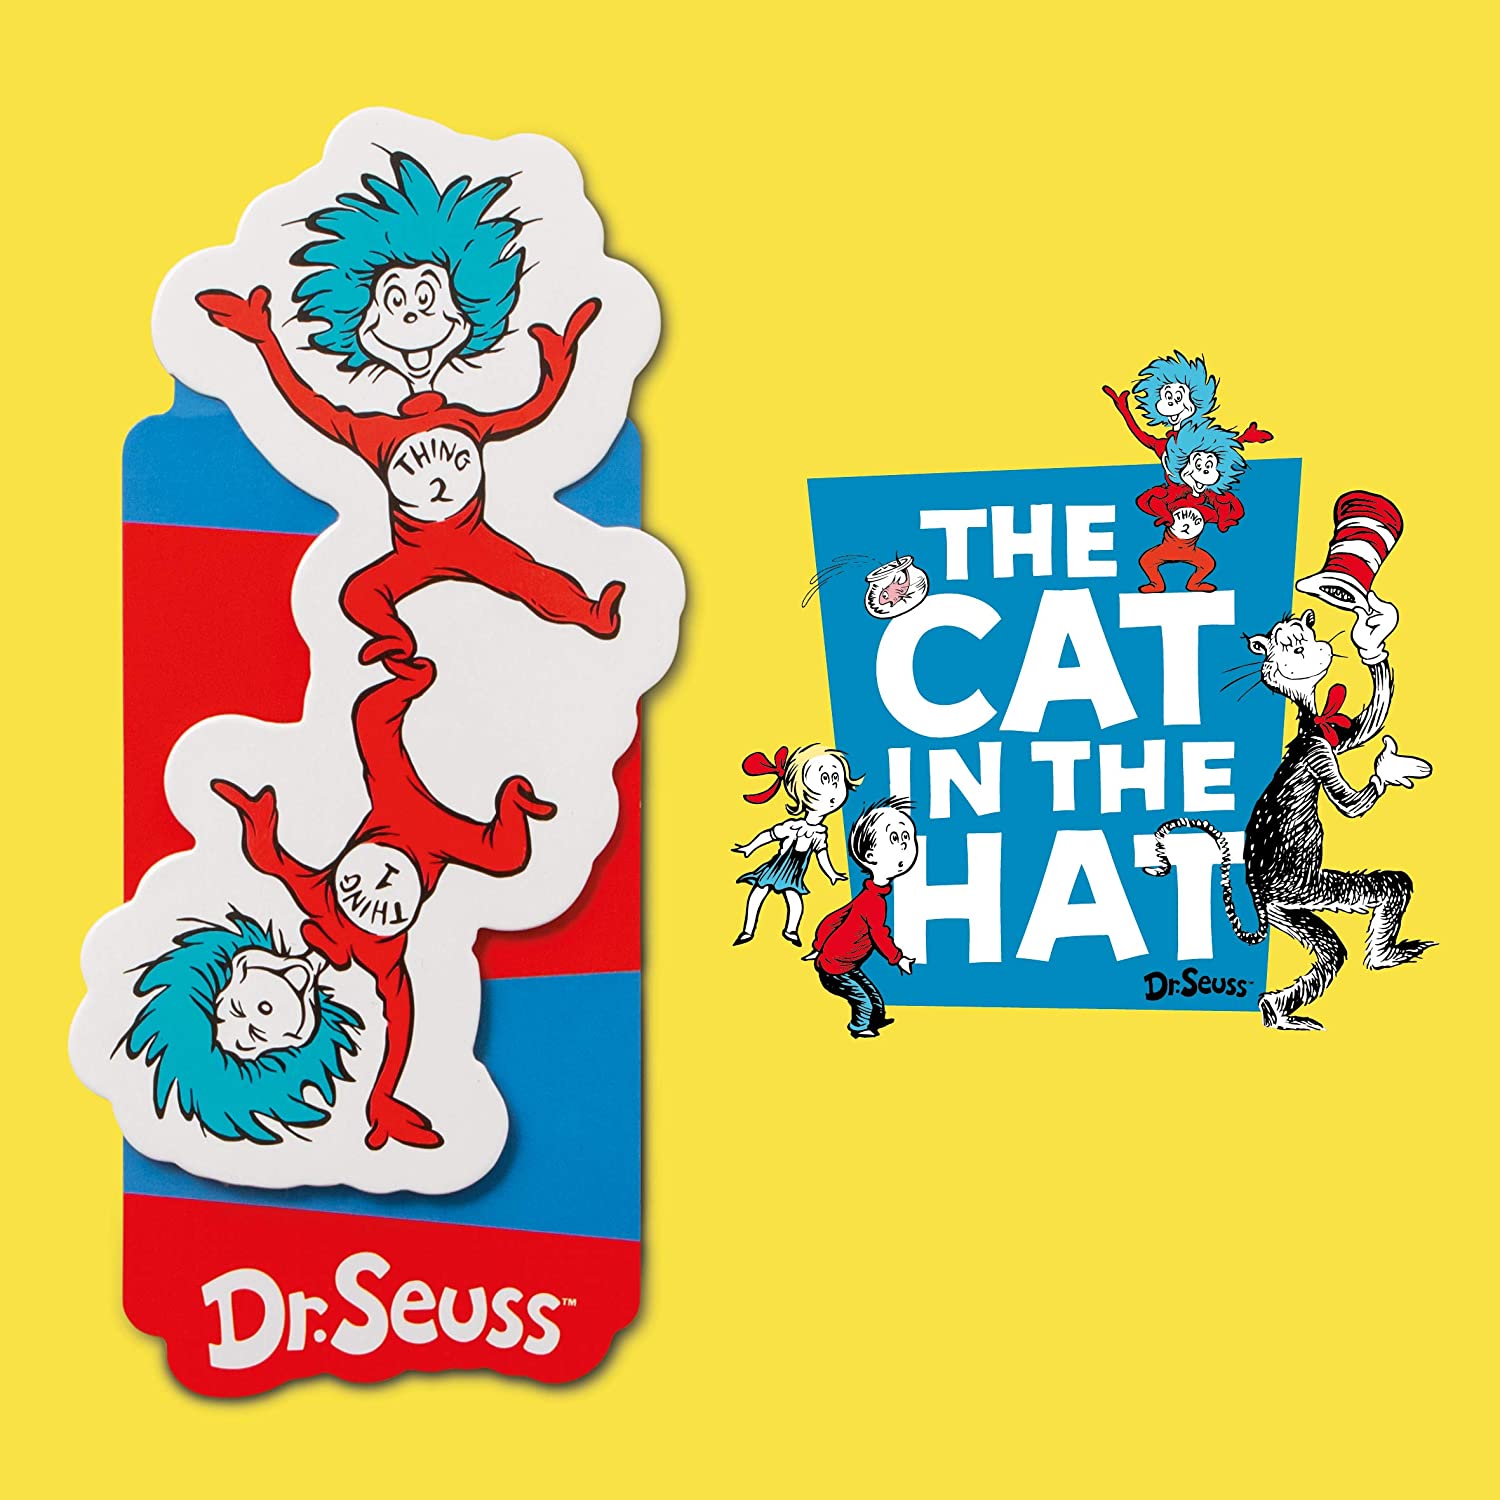 IF Company: Dr. Seuss Magnetic Bookmarks - Thing 1 & Thing 2